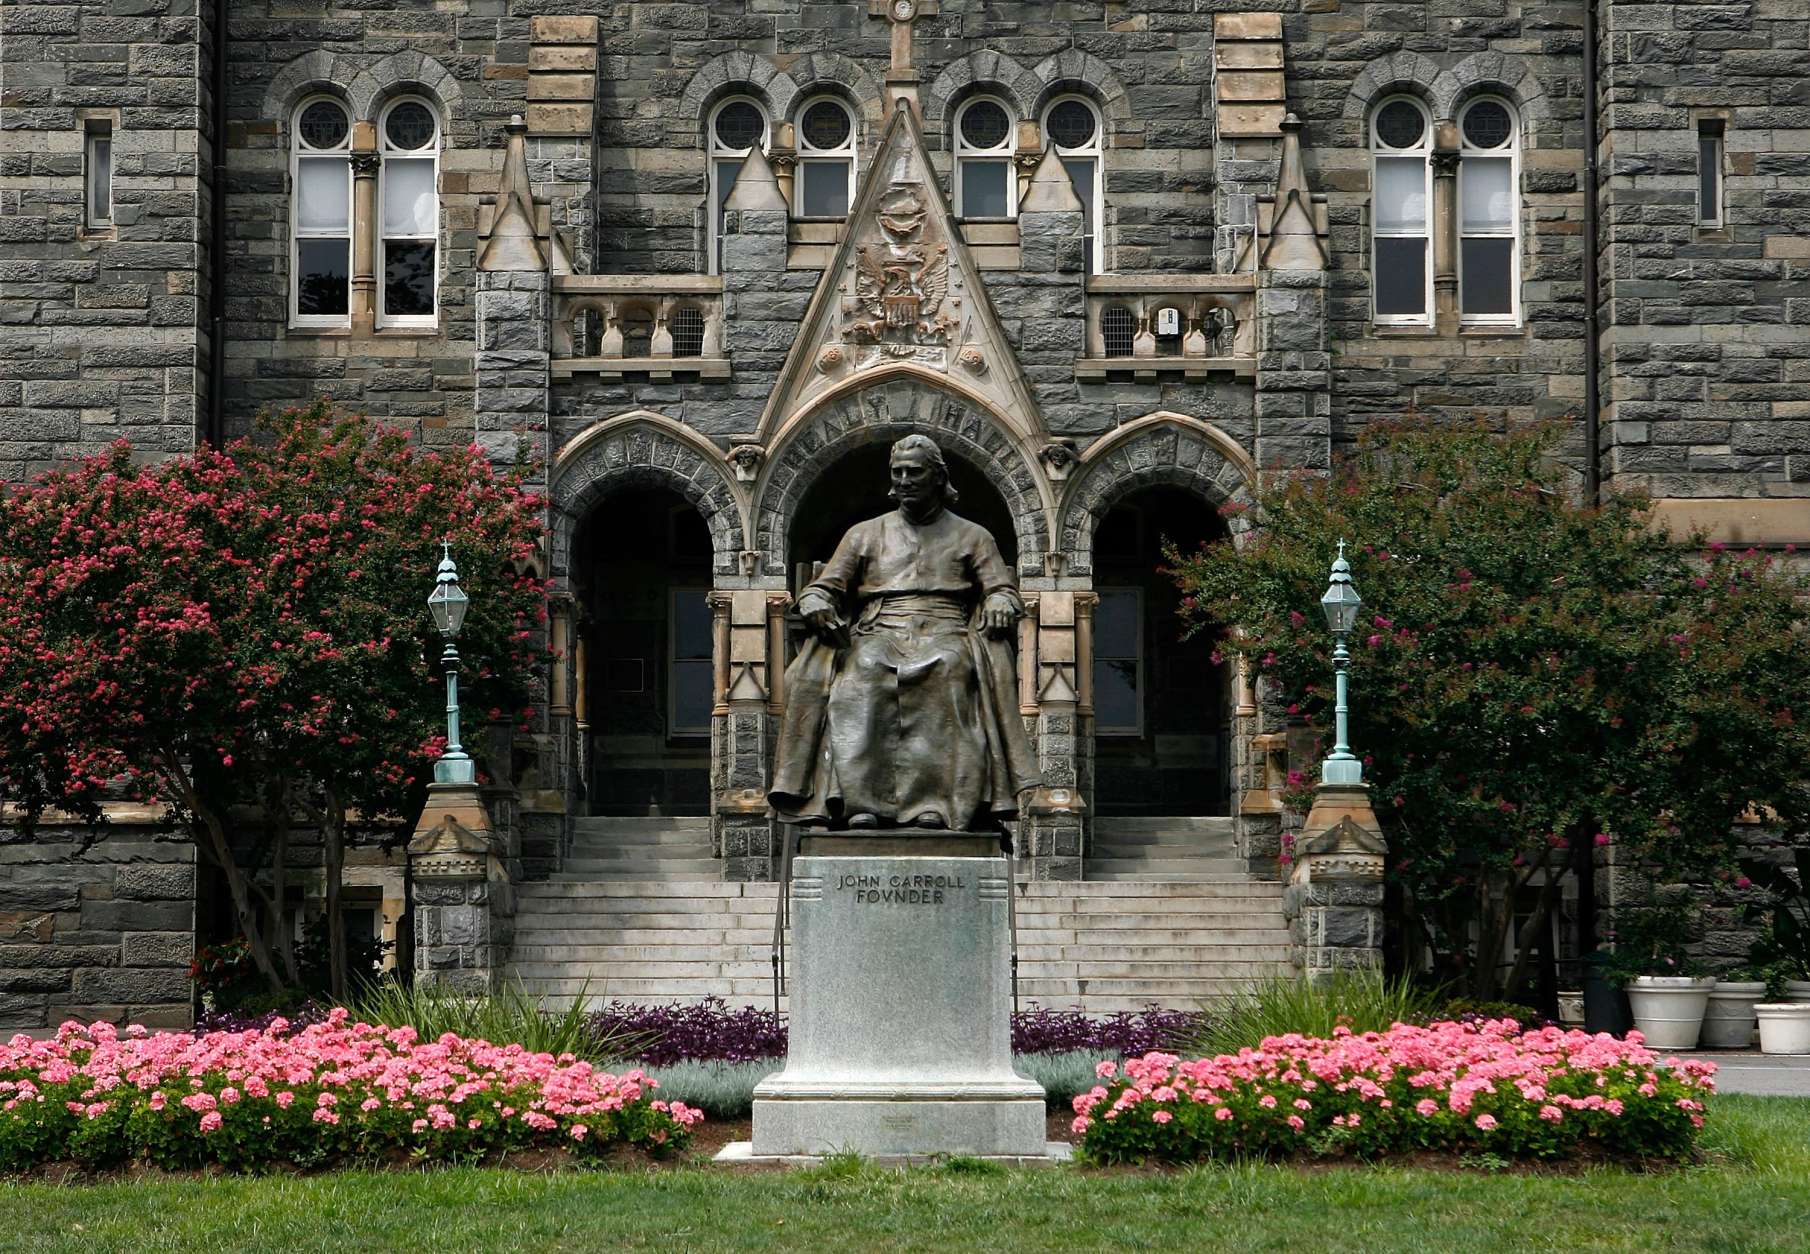 WASHINGTON - AUGUST 15:  A statue of John Carroll, founder of Georgetown University, sits before Healy Hall on the school's campus Aug. 15, 2006 in Washington, D.C. Georgetown University was founded in 1789 and it is the oldest Catholic and Jesuit university in the U.S.  (Photo by Alex Wong/Getty Images)